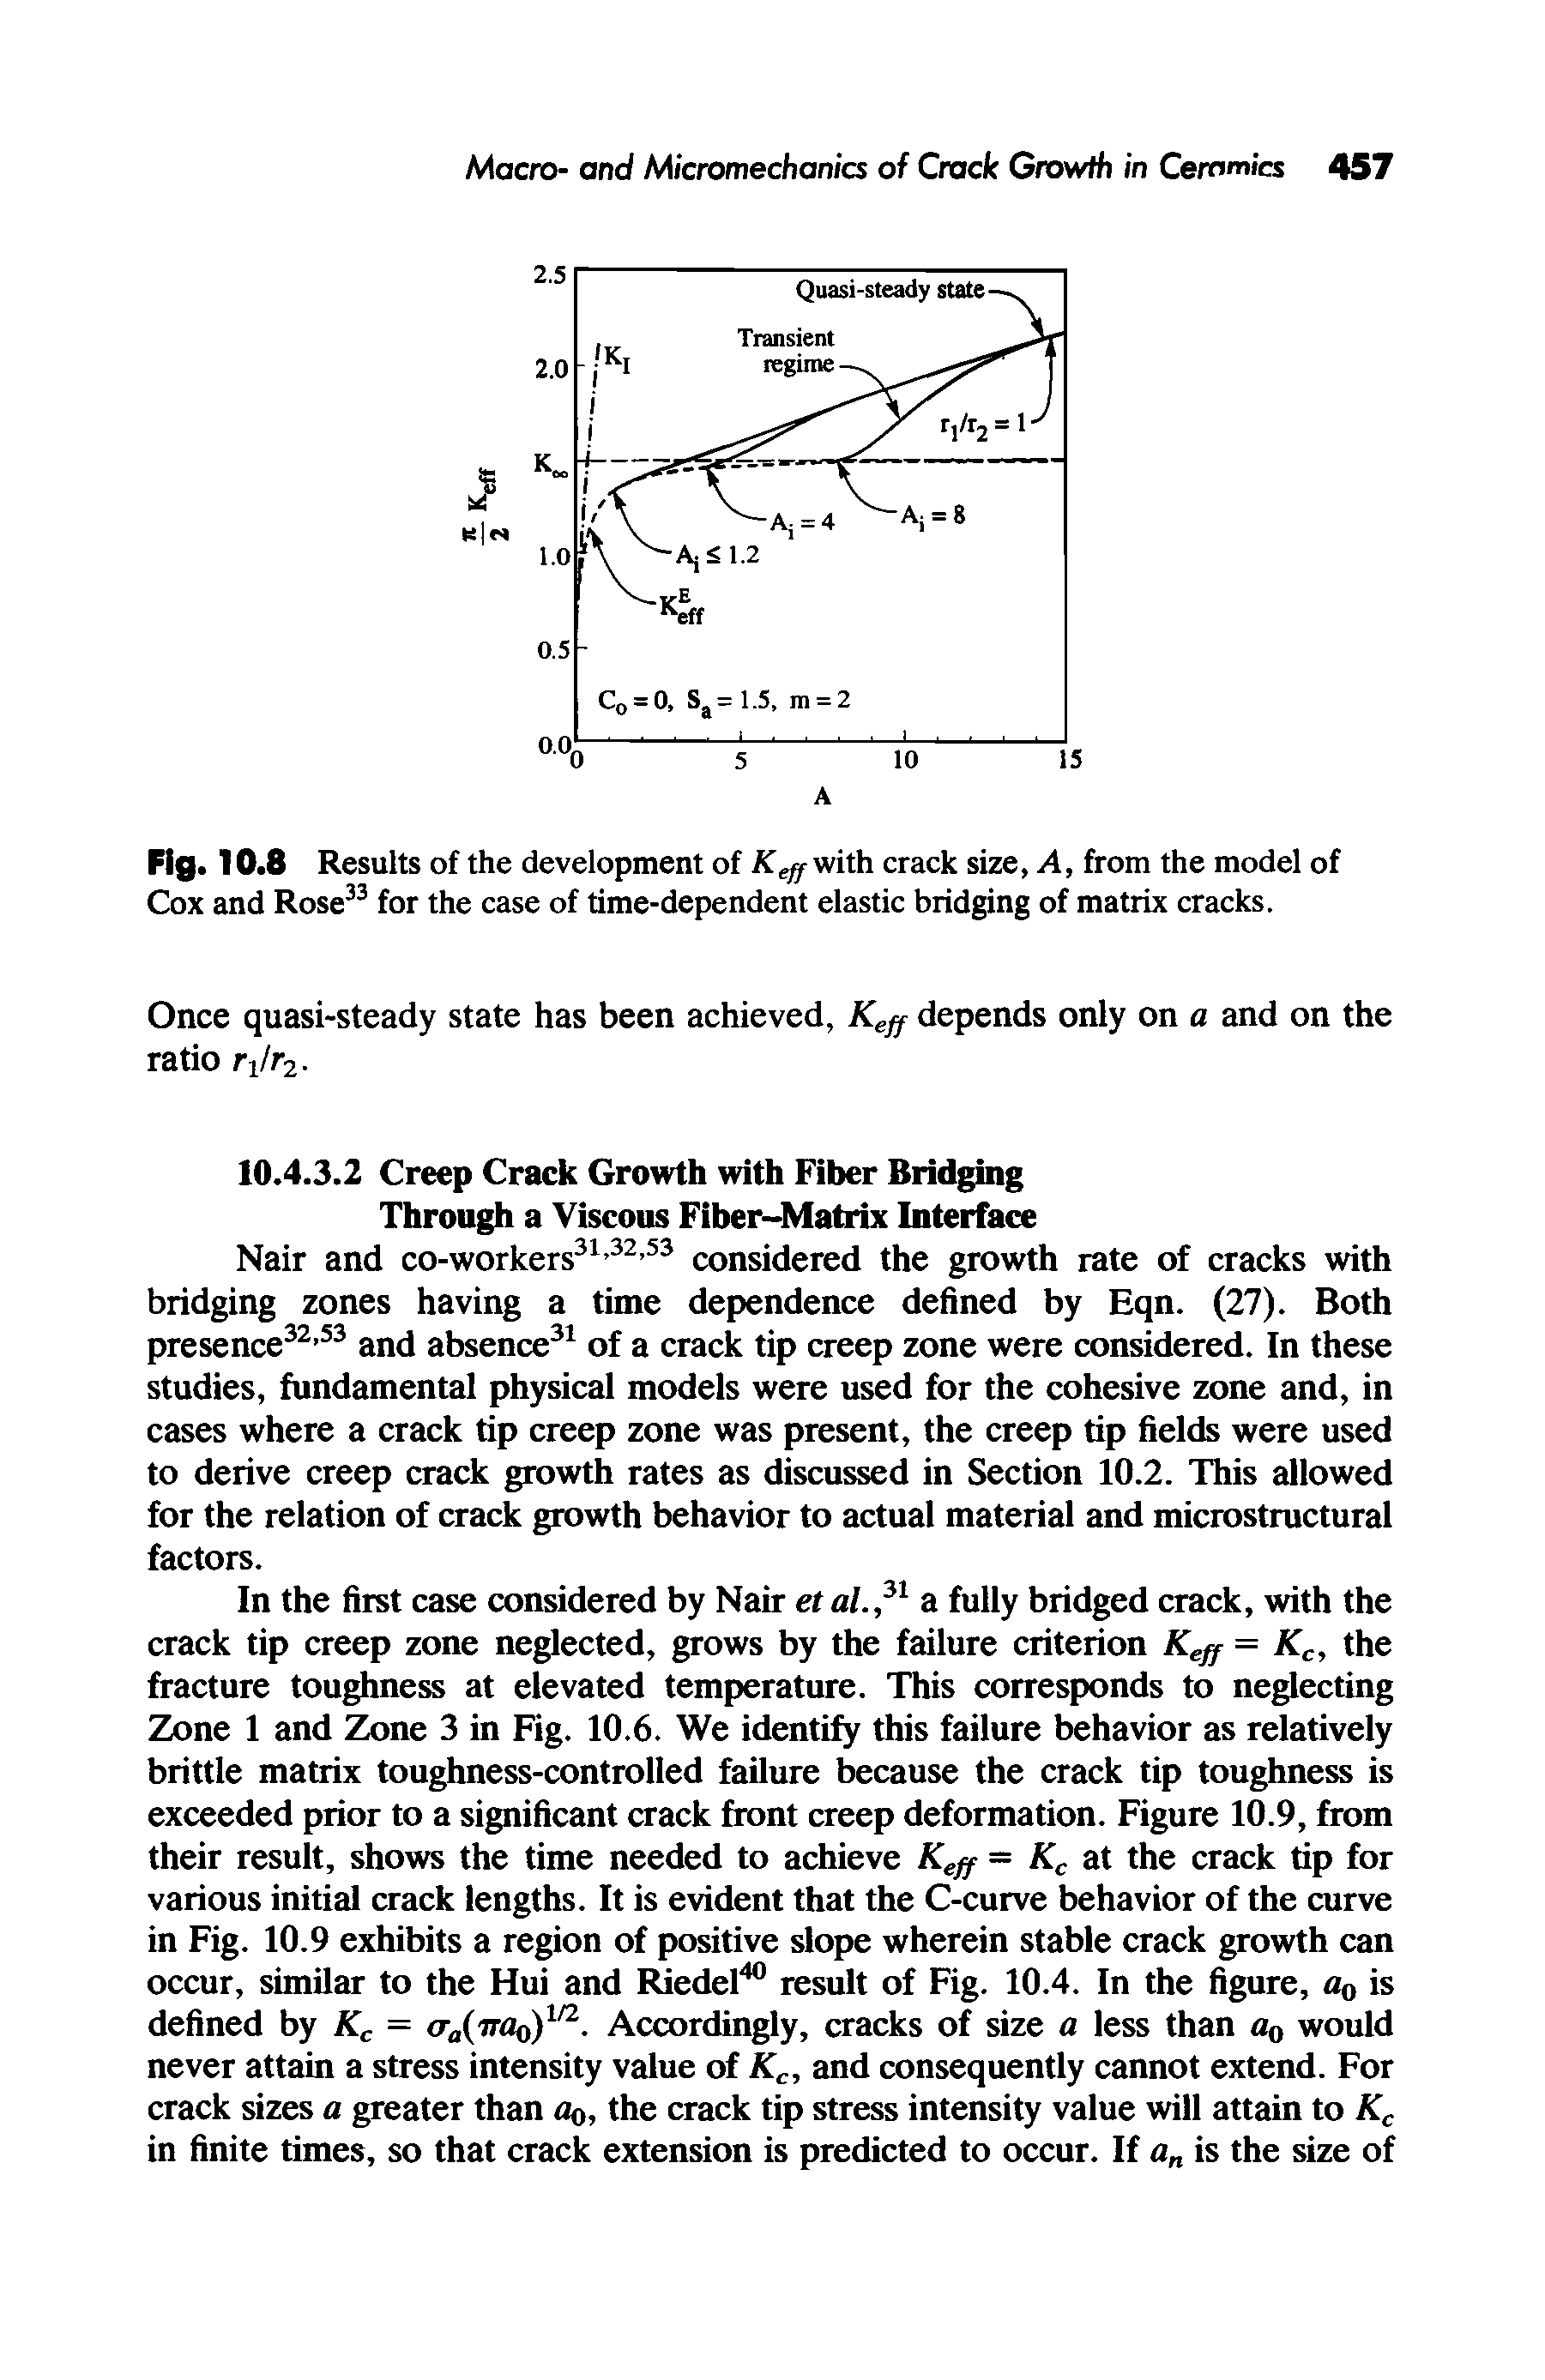 Fig. 10.8 Results of the development of K with crack size, A, from the model of Cox and Rose33 for the case of time-dependent elastic bridging of matrix cracks.